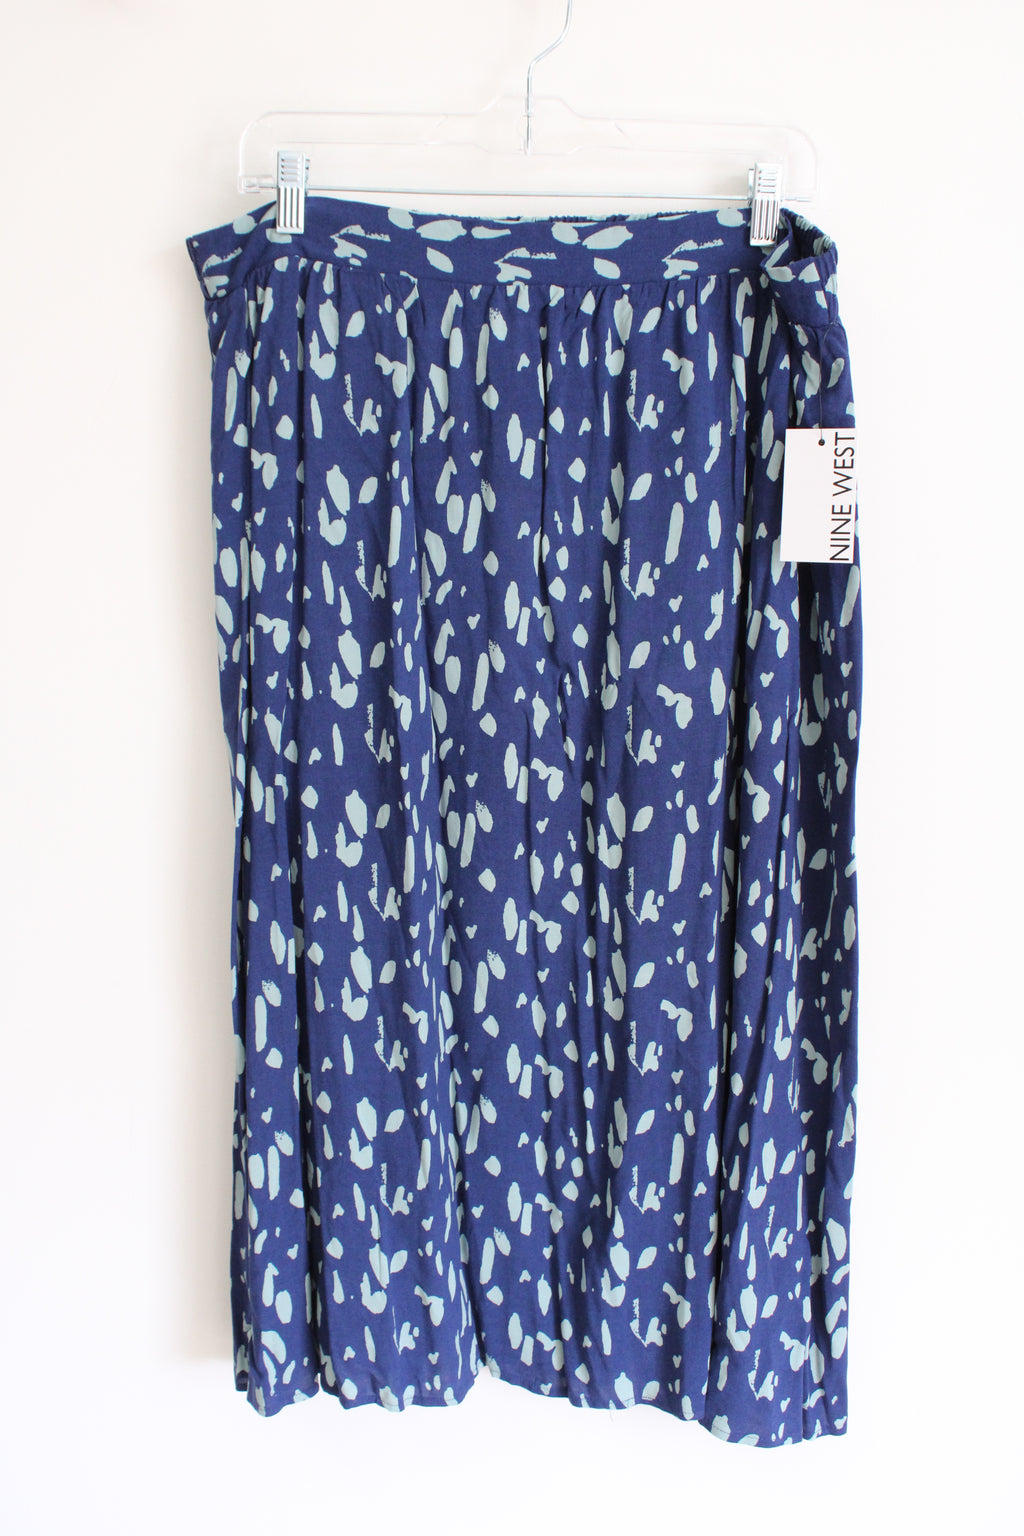 NEW Nine West Blue Speckled Rayon Skirt | XL